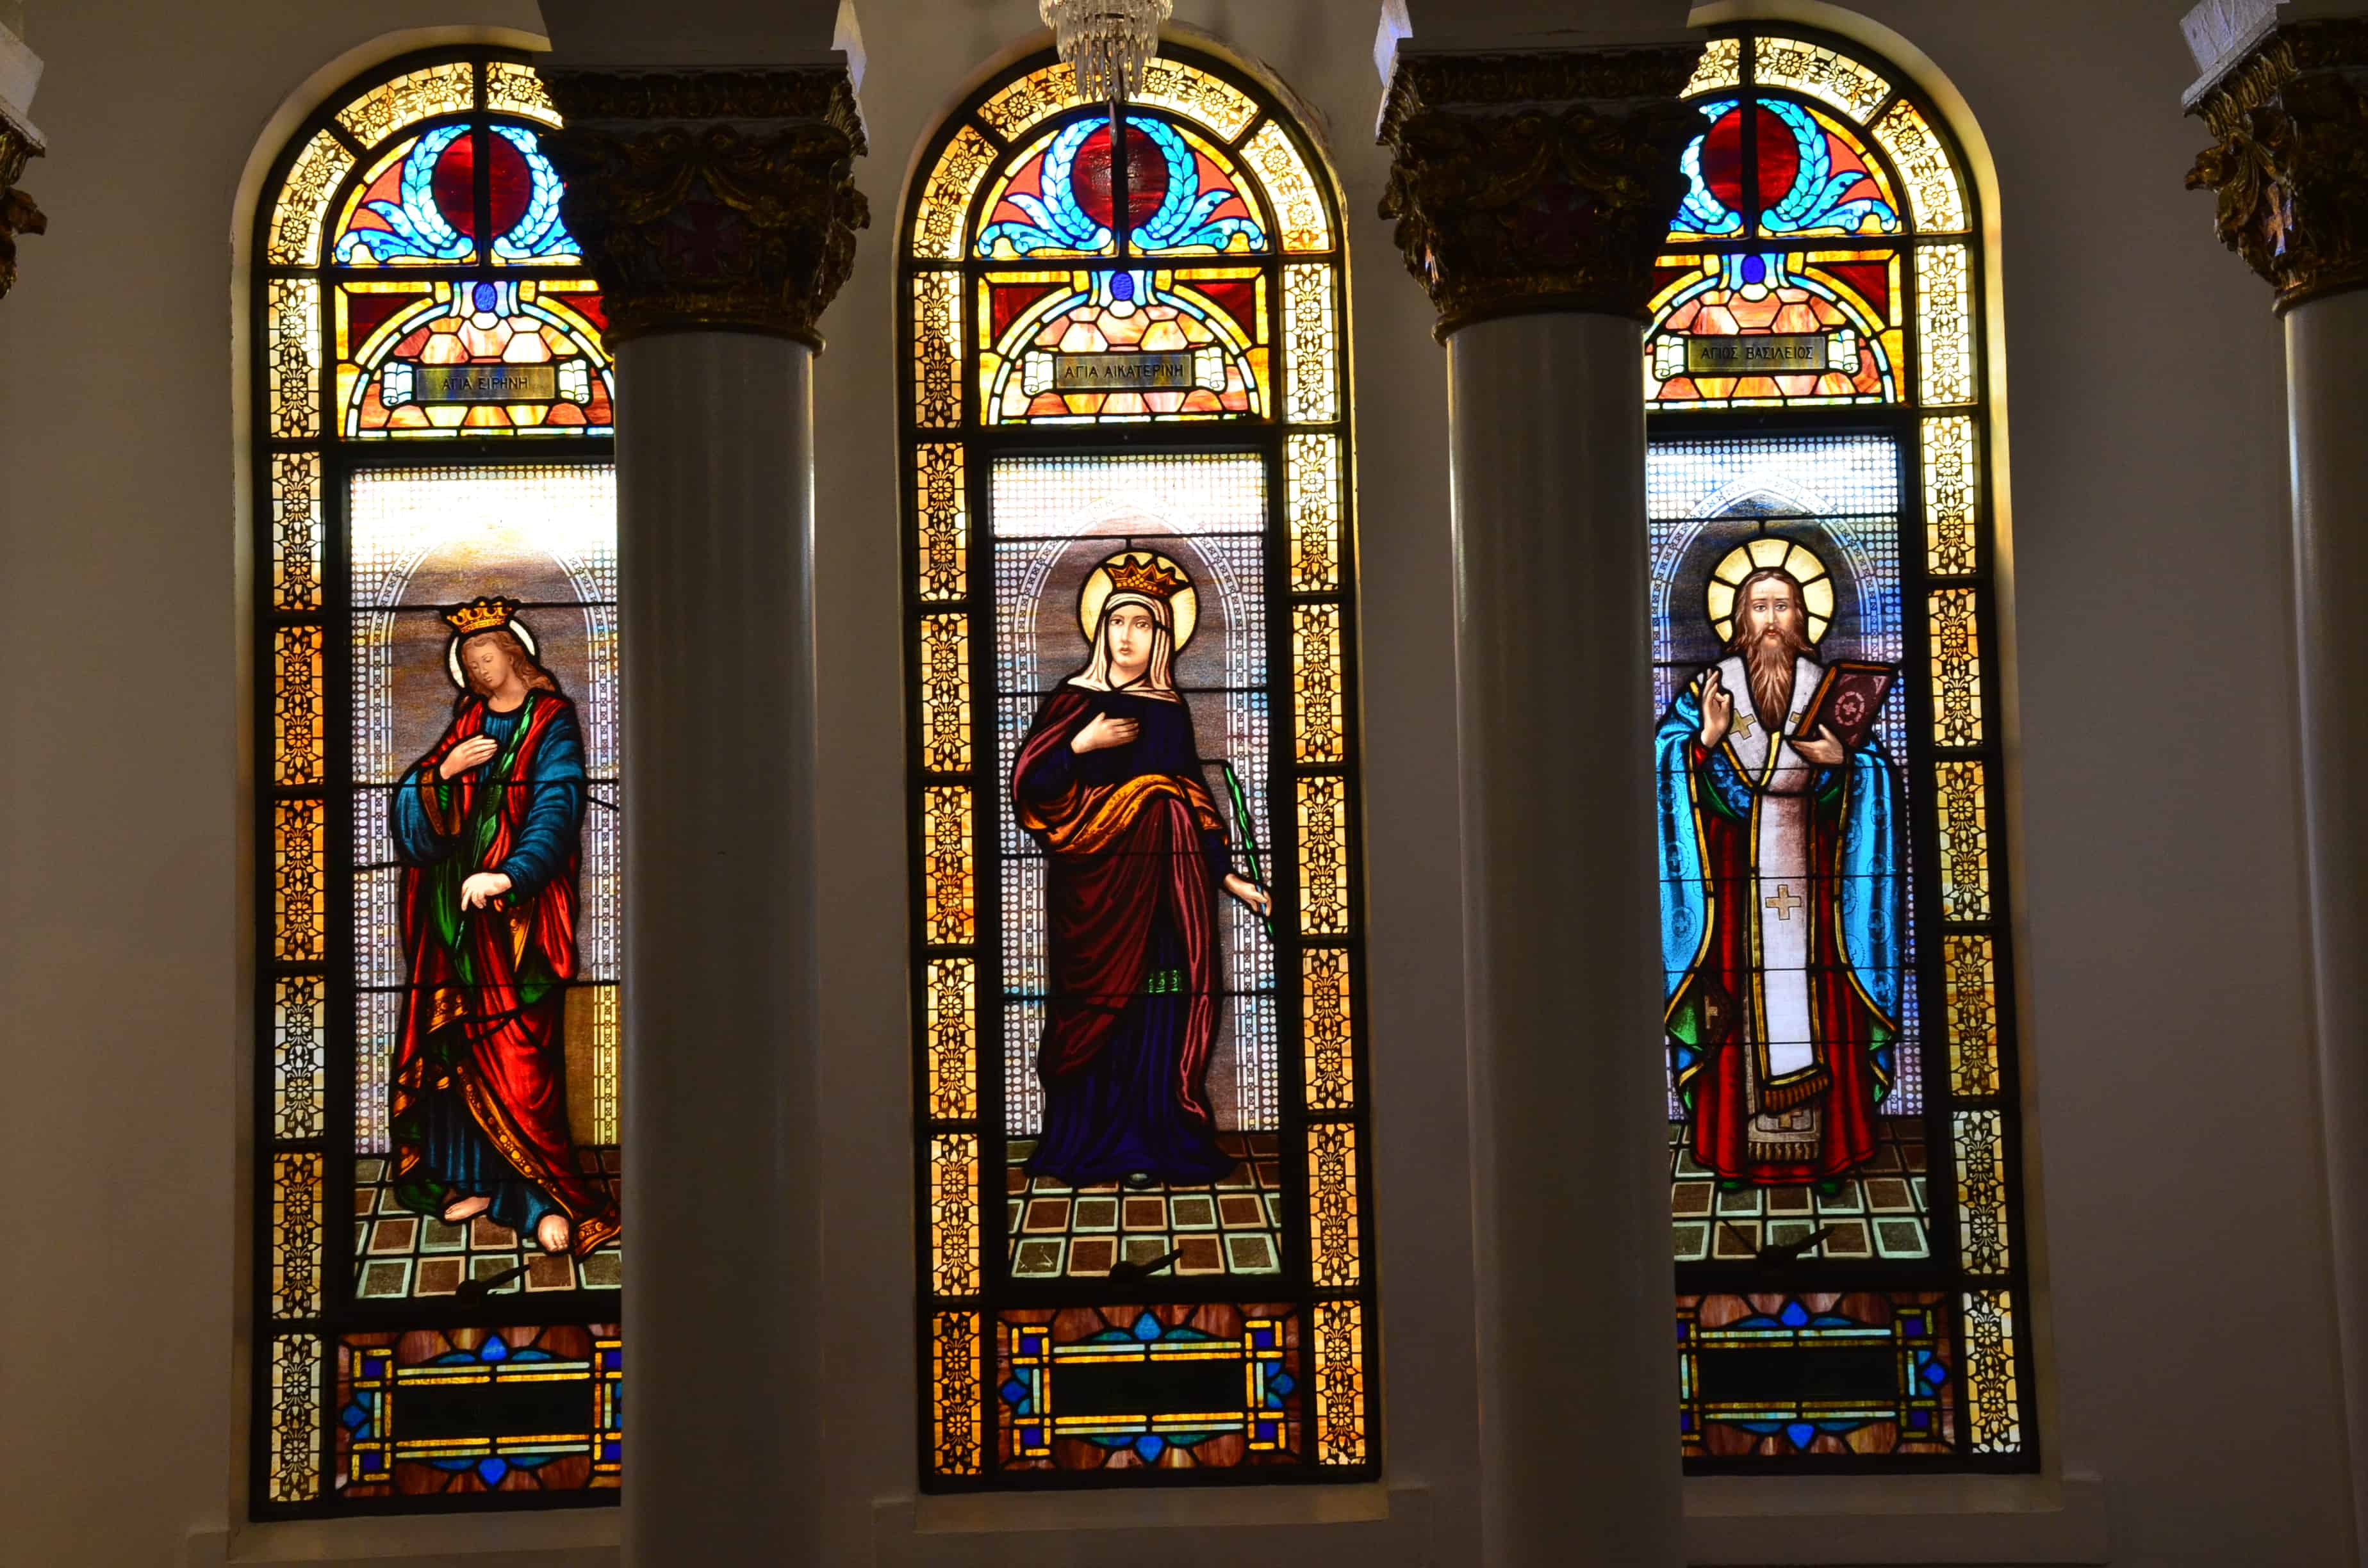 Stained glass windows at St. Nicholas Greek Orthodox Cathedral in Tarpon Springs, Florida